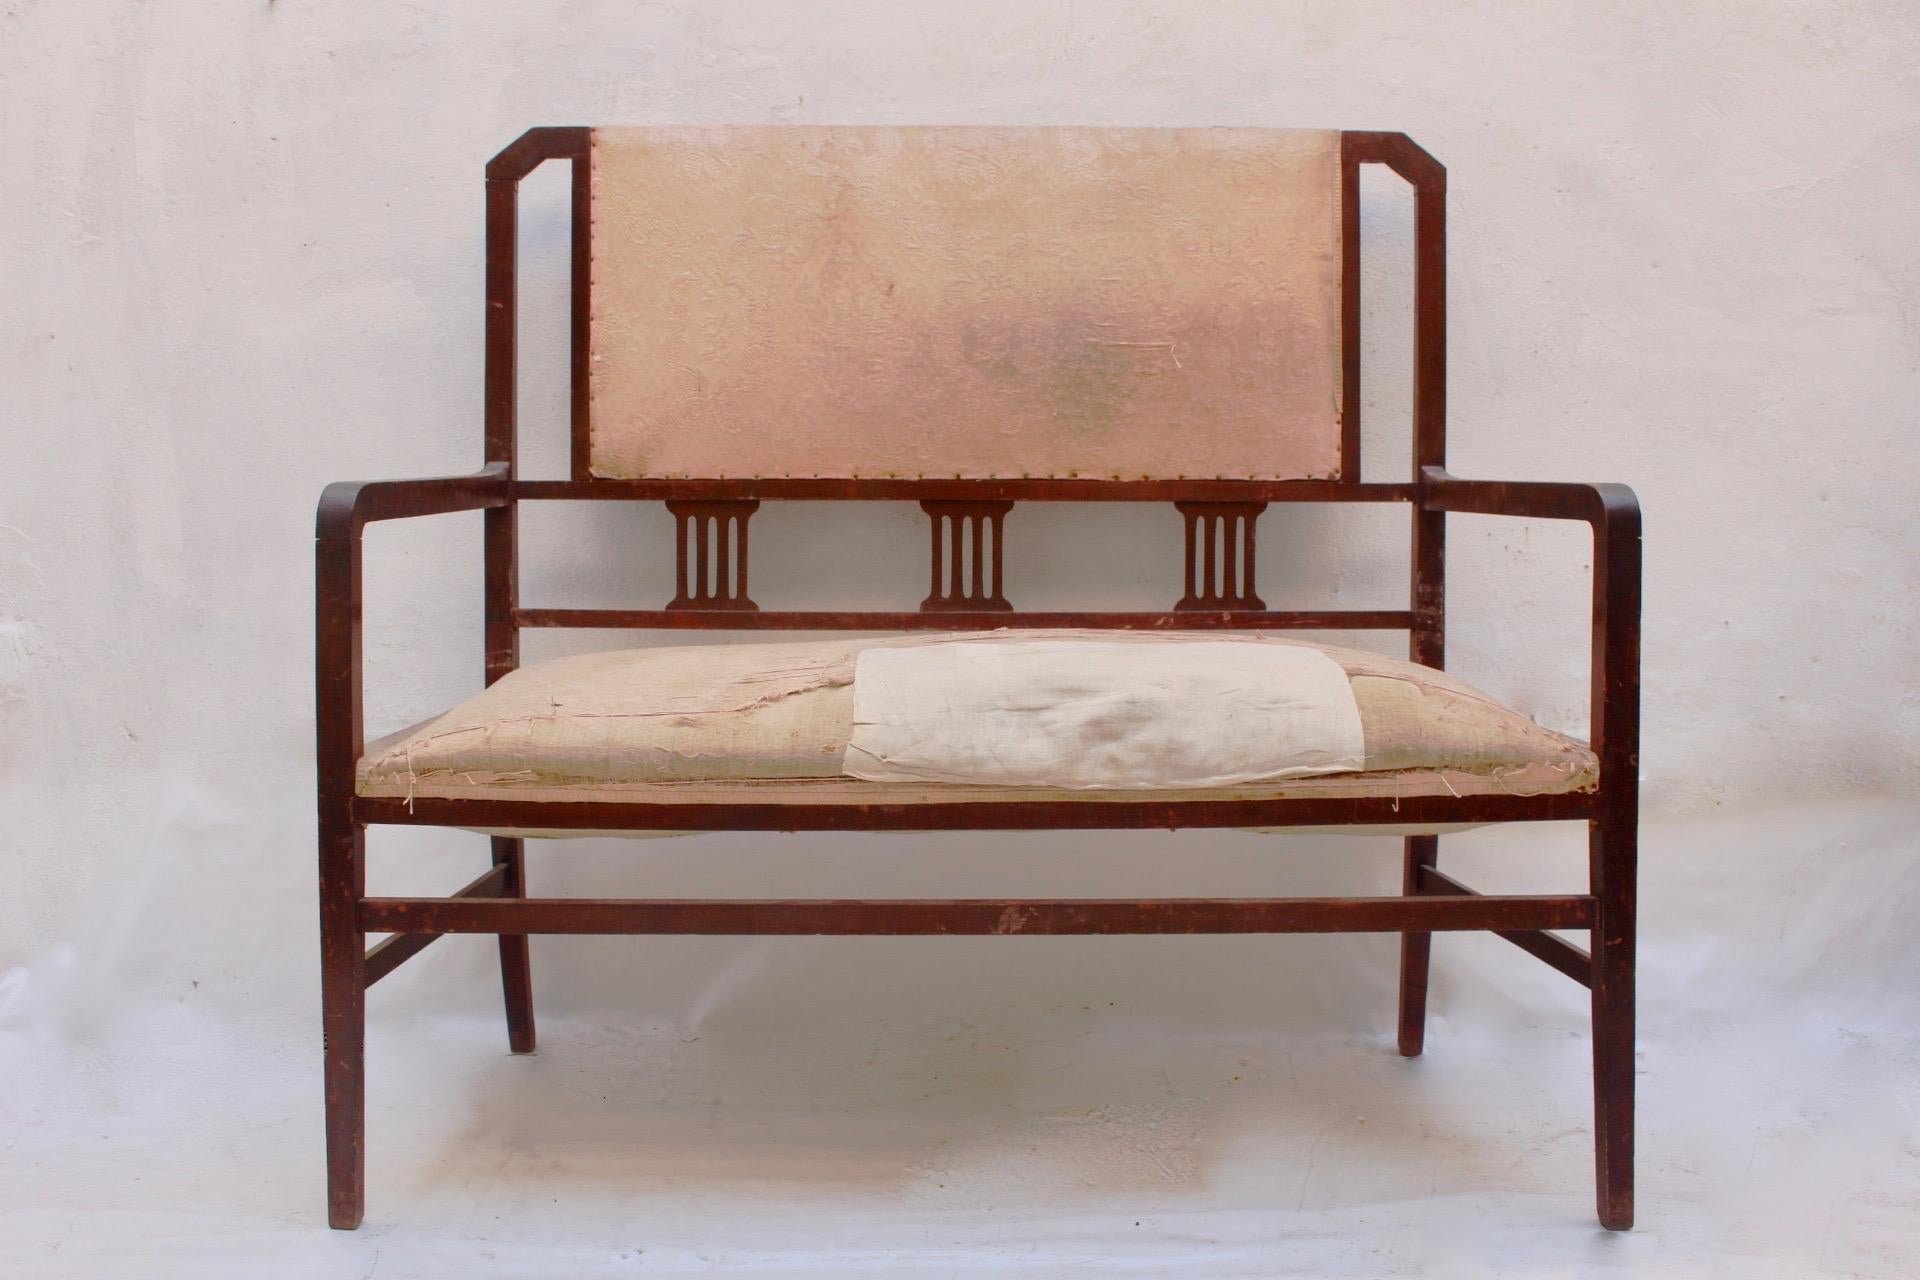 Art Deco Beech wood living room set, Spain, 1930s.
Each piece signed E. Soler. Granada, Spain.
1 settee, 2 armchairs and 2 site chairs.
Fabric in fair condition. The 2 side chairs need to be glued again.
Dimensions:
Armchairs : H 109.5 cm x W 54.5